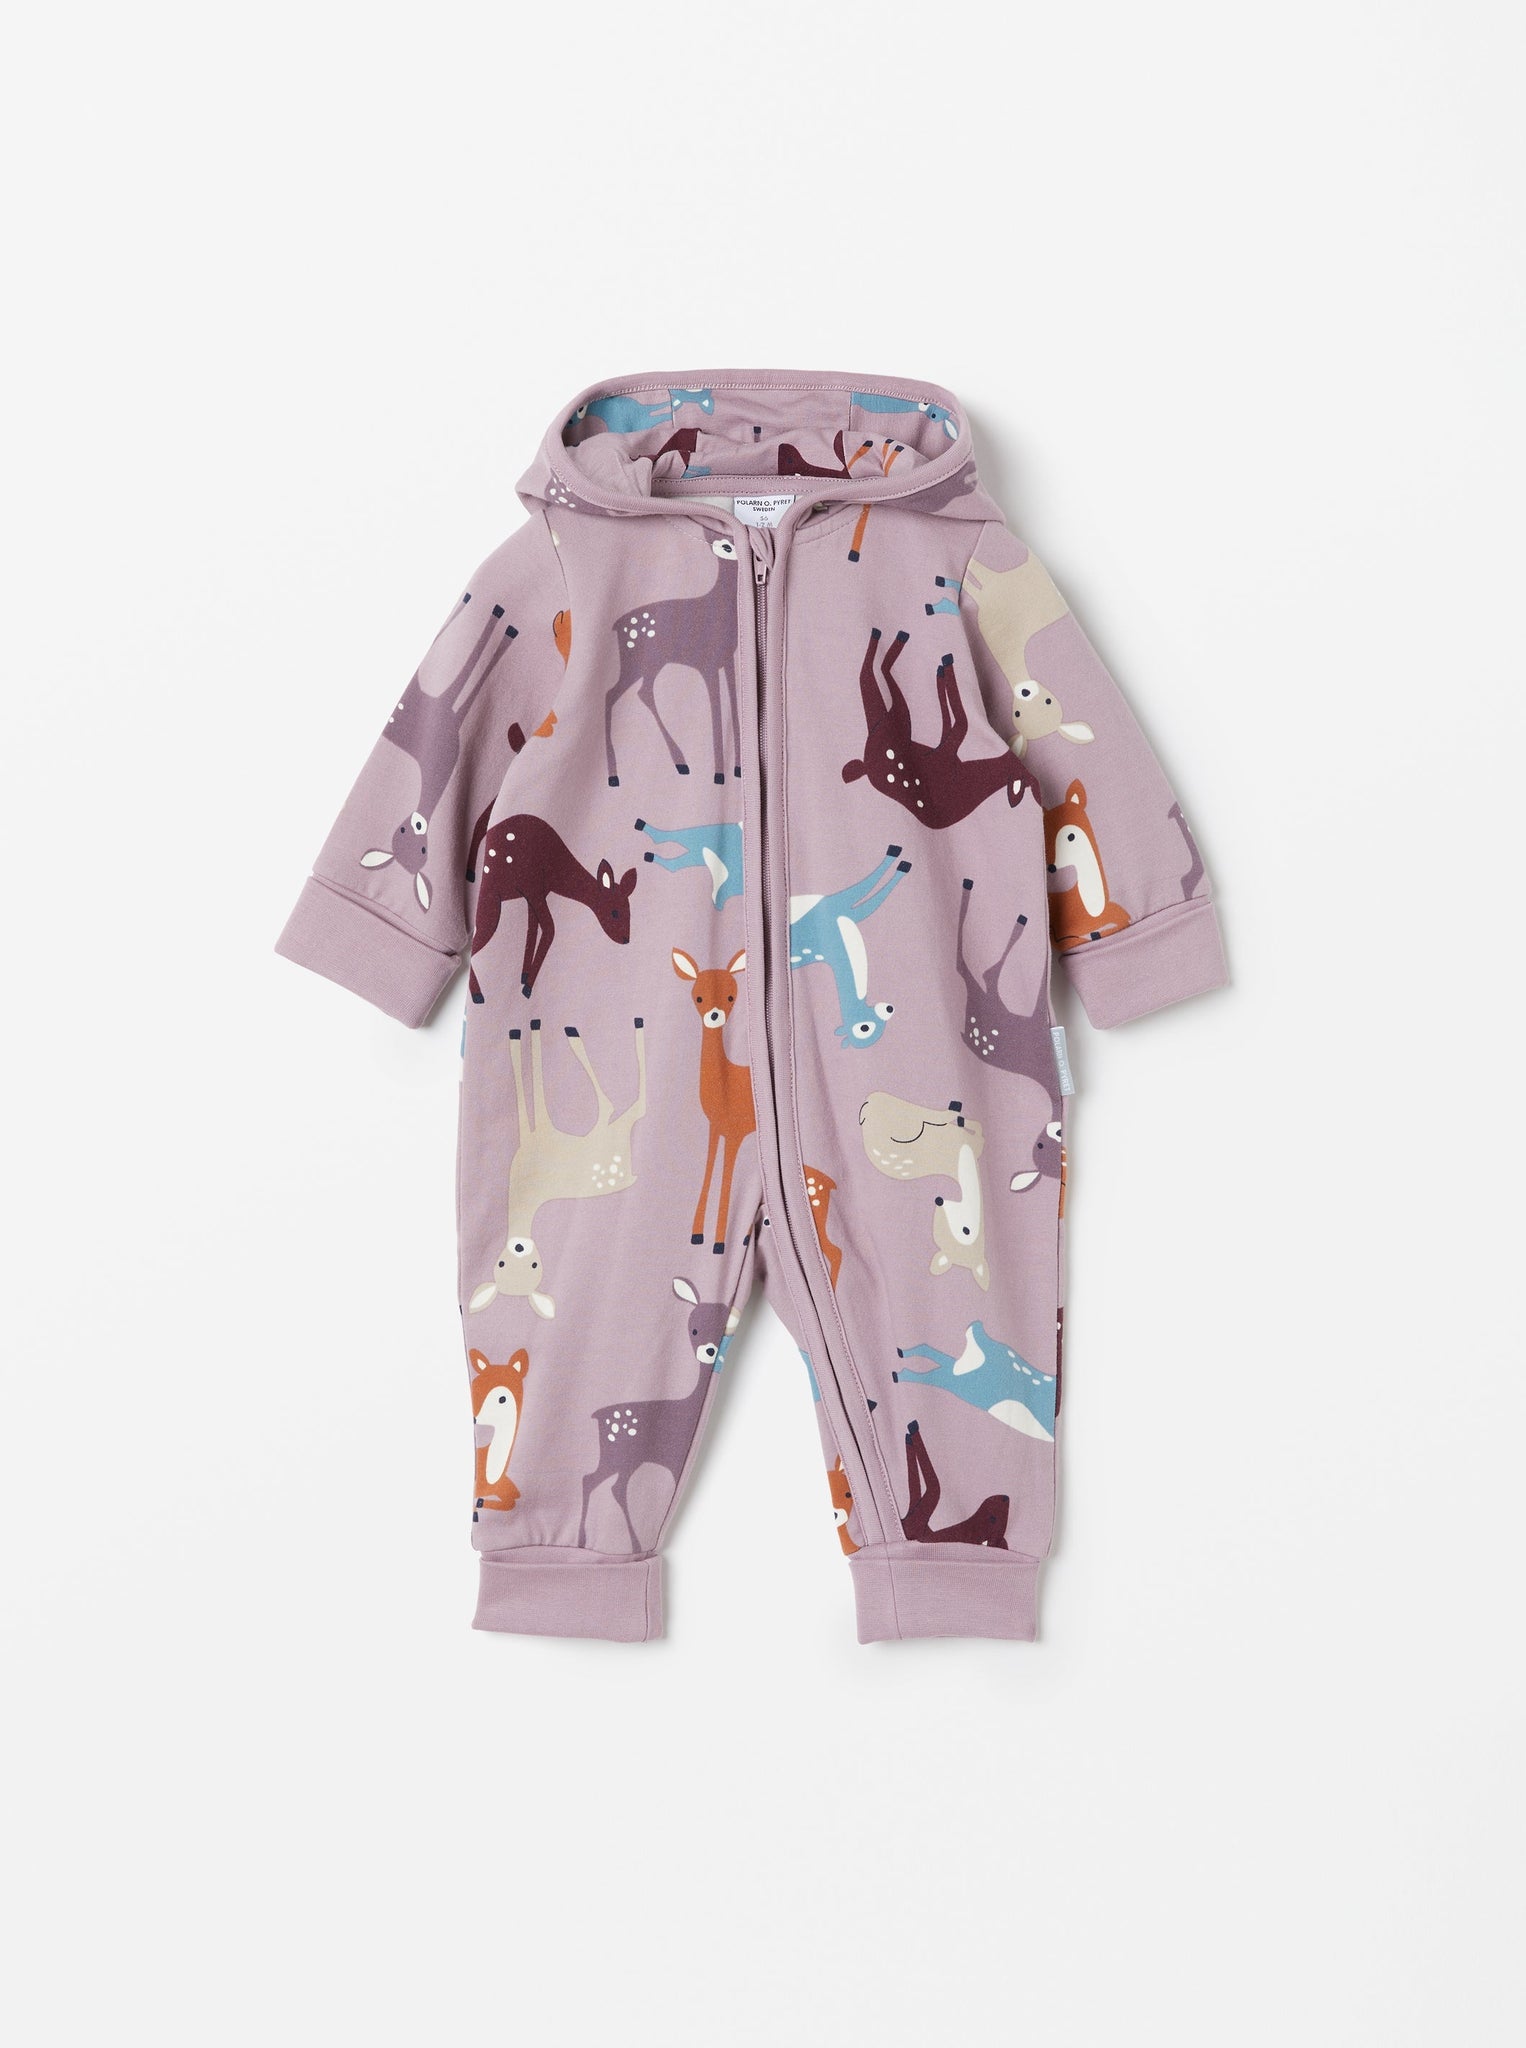 Nordic Pink Baby All-In-One from the Polarn O. Pyret babywear collection. Nordic baby clothes made from sustainable sources.